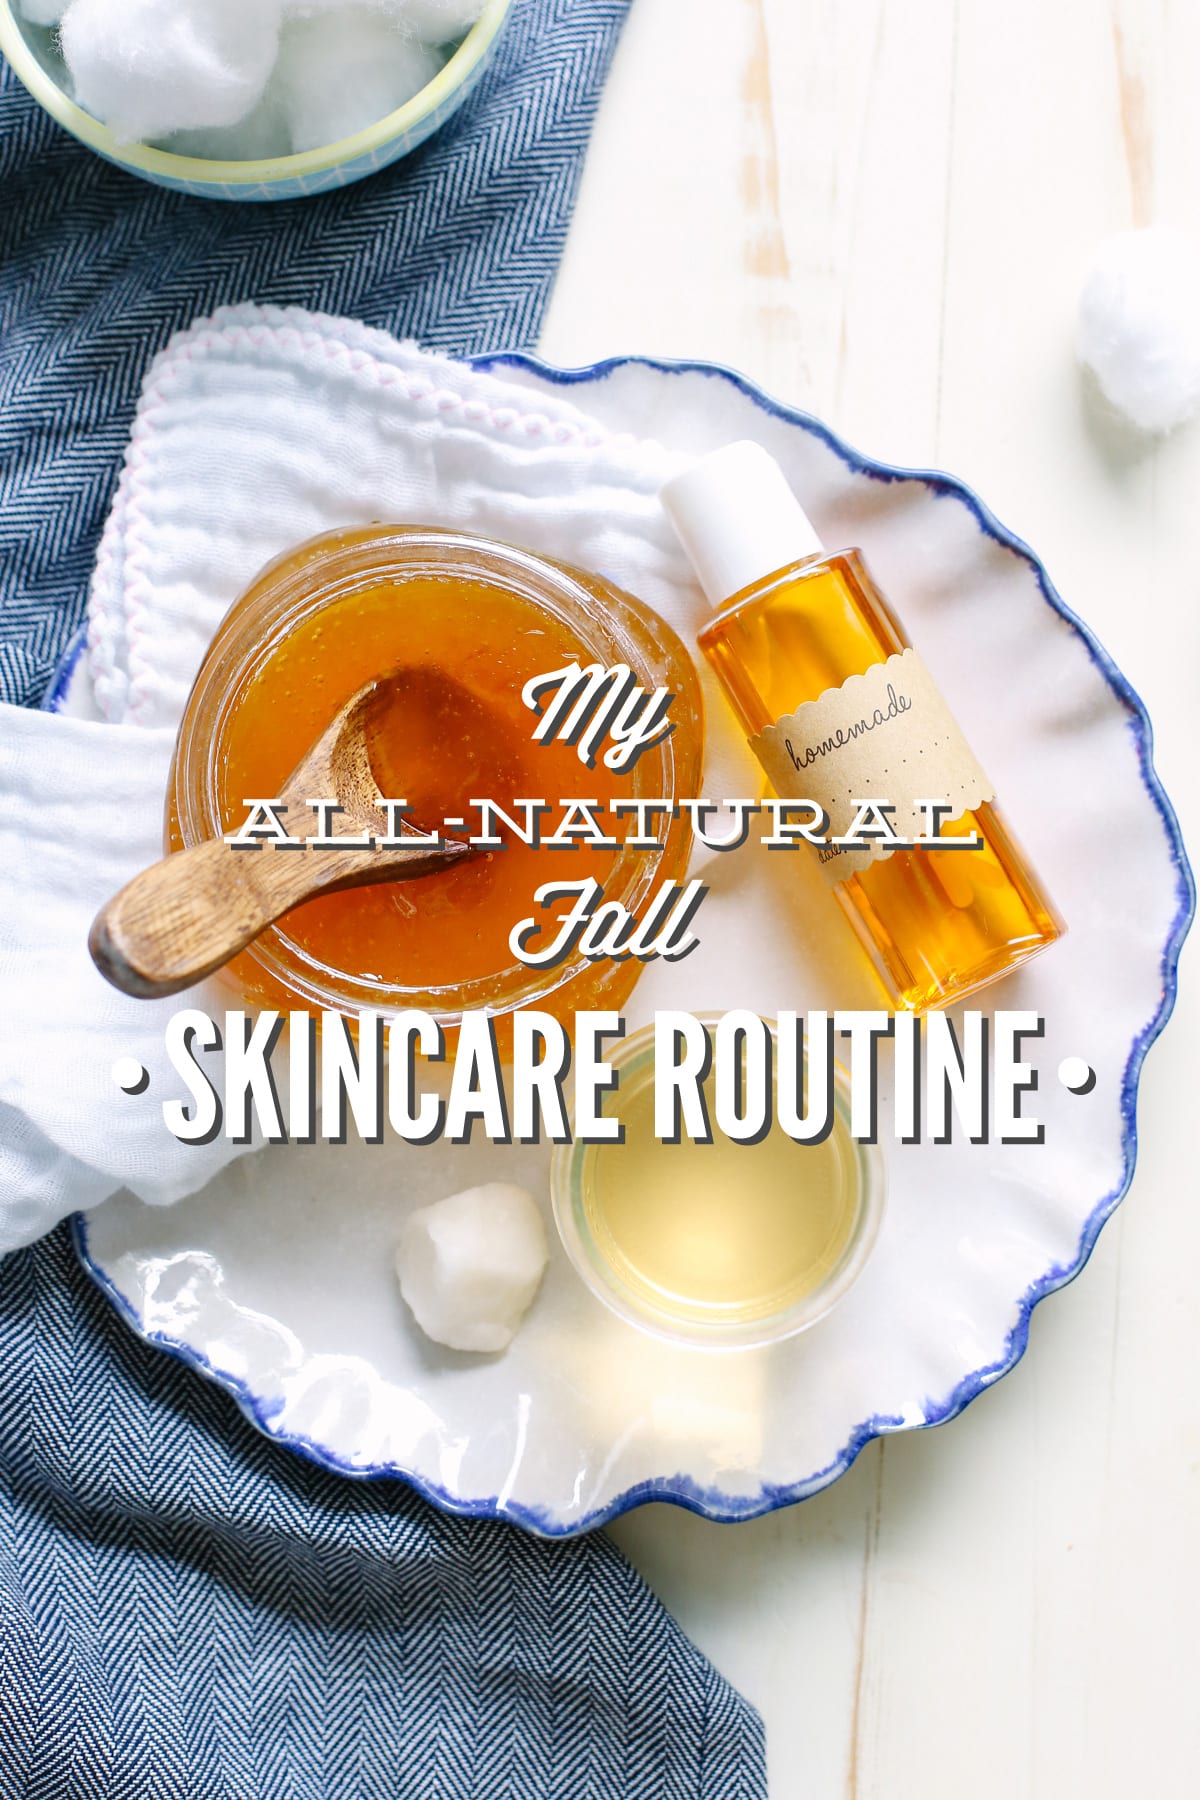 My All-Natural Fall Skincare Routine